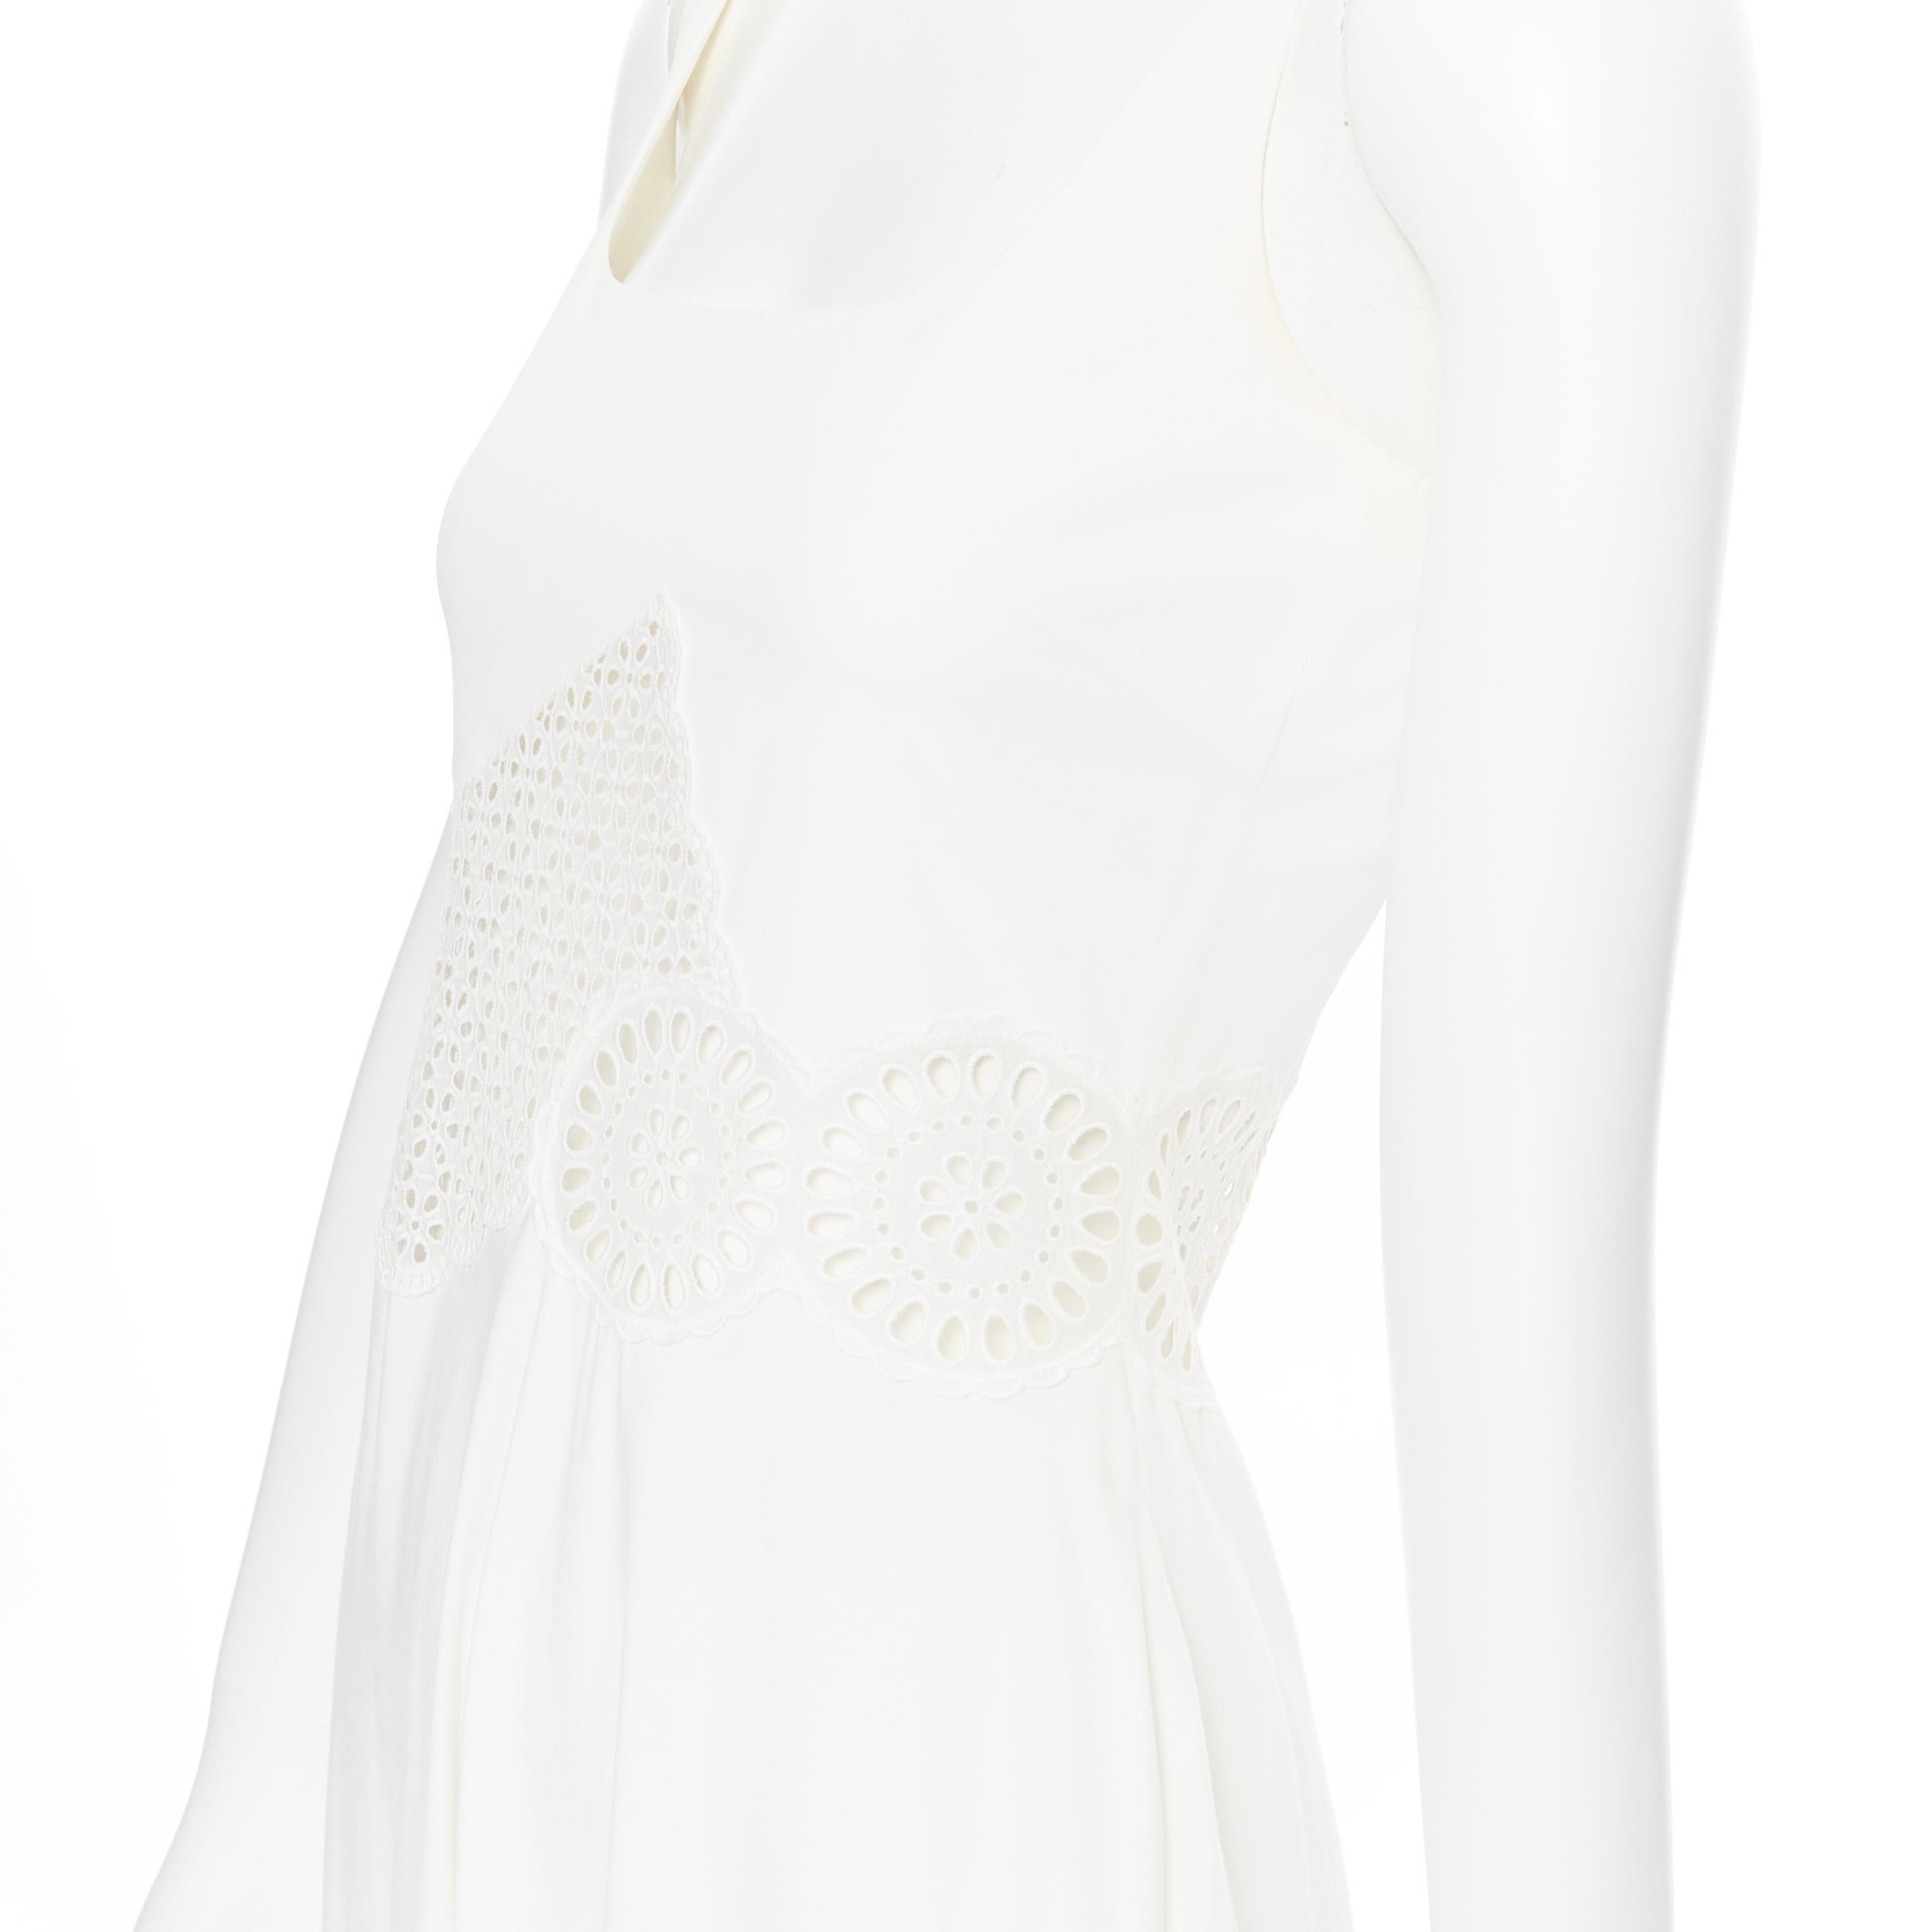 STELLA MCCARTNEY white cotton eyelet embroidery panel maxi dress IT34 XS
Brand: Stella McCartney
Designer: Stella McCartney
Model Name / Style: Cotton dress
Material: Cotton
Color: White
Pattern: Solid
Extra Detail: Eyelet detail at waist and at